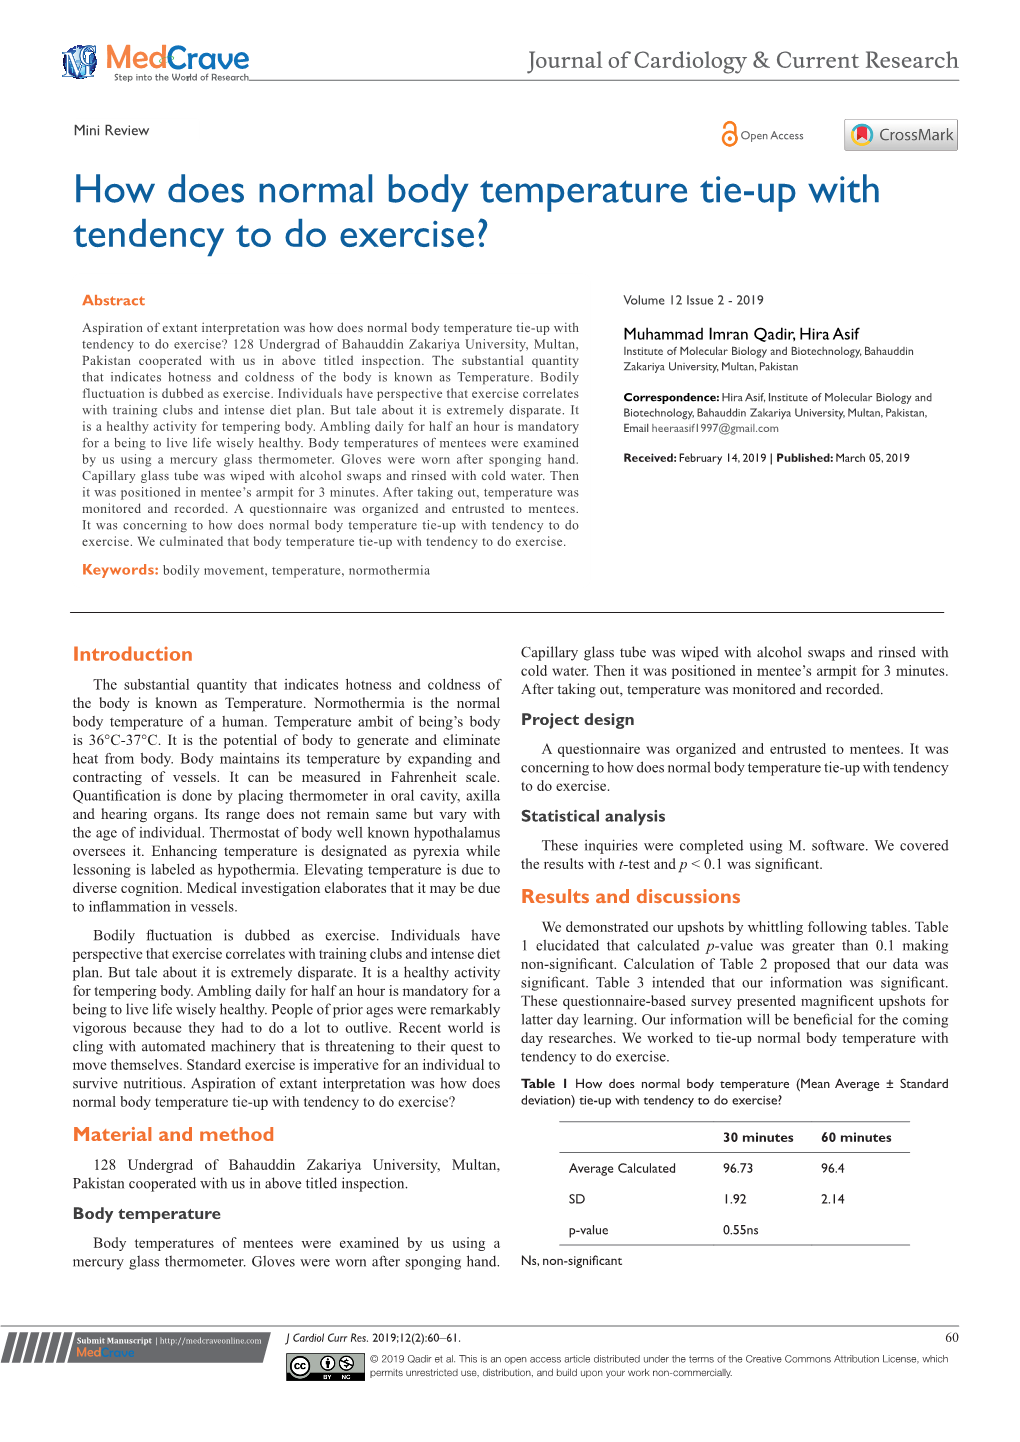 How Does Normal Body Temperature Tie-Up with Tendency to Do Exercise?